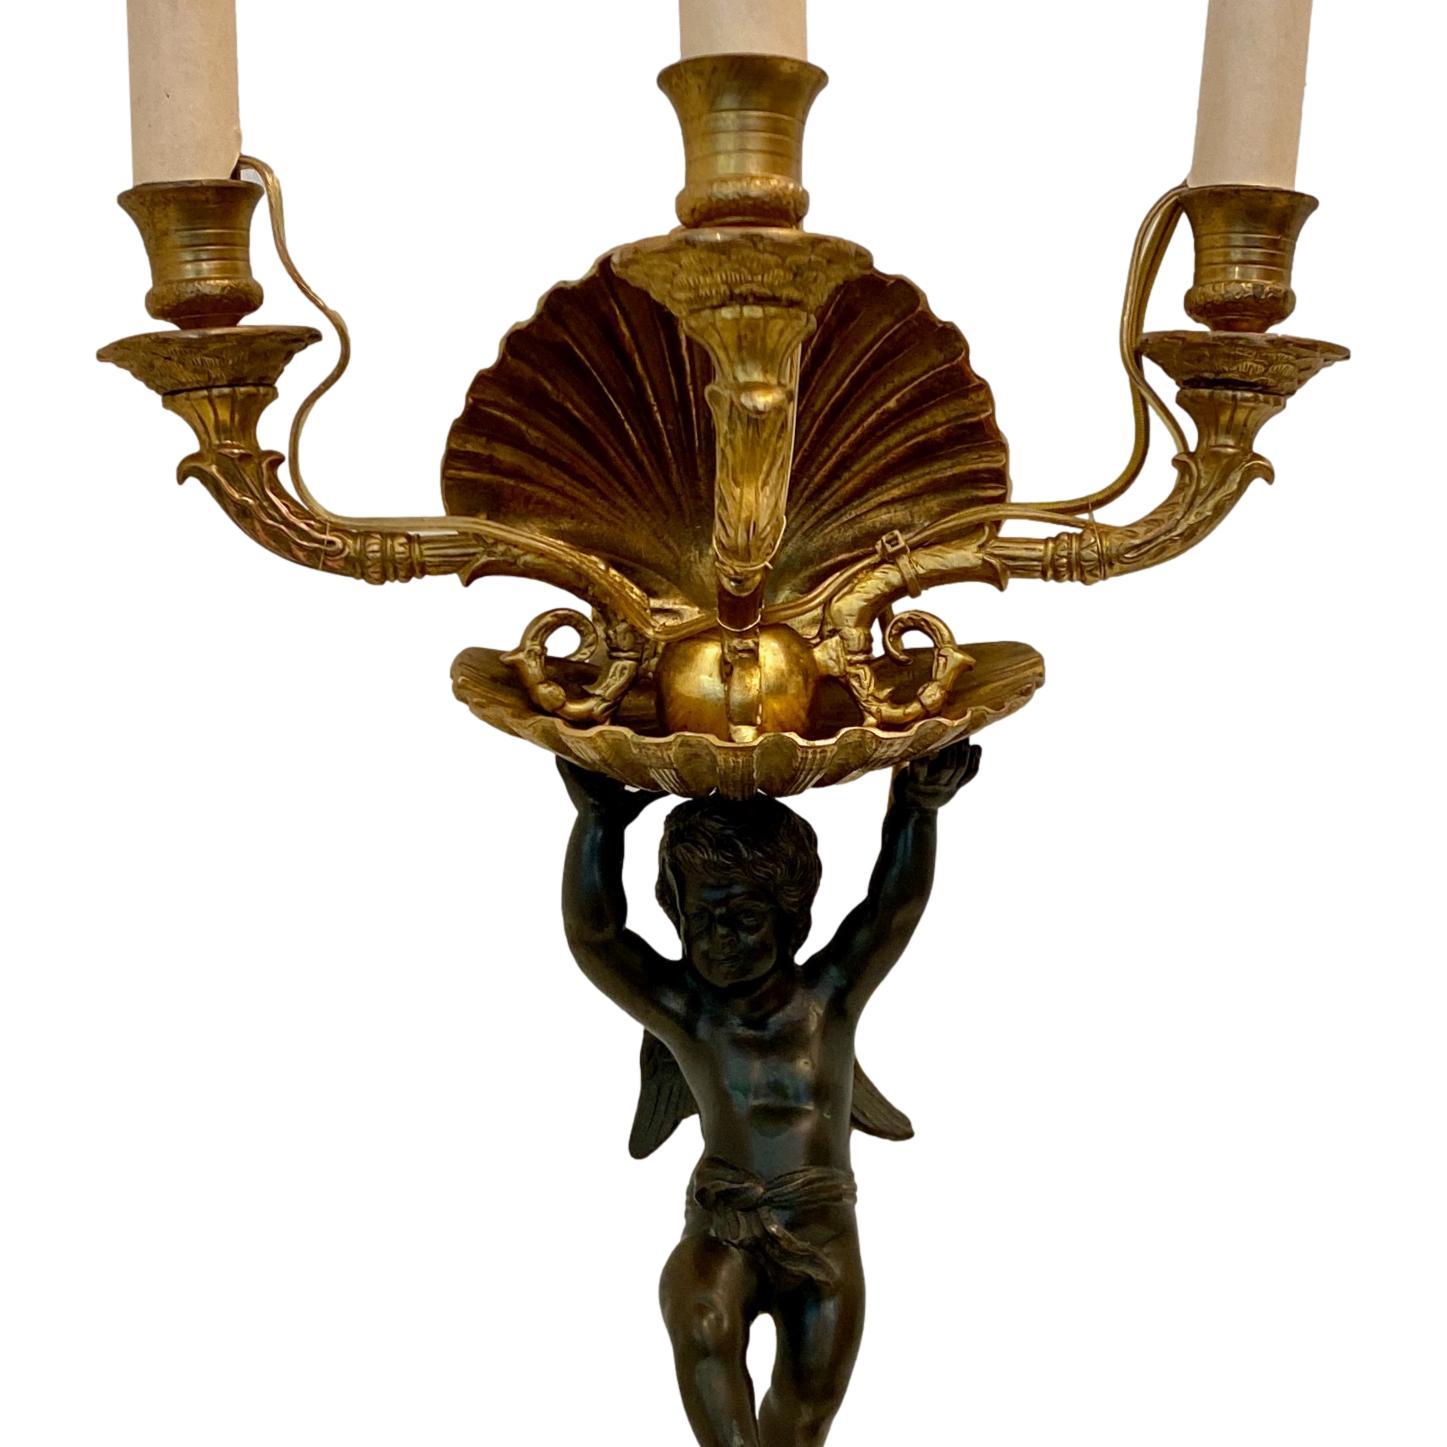 A circa 1900 gilt bronze electrified candelabra with cherub and shell motif.

Measurements:
 Total Height: 21